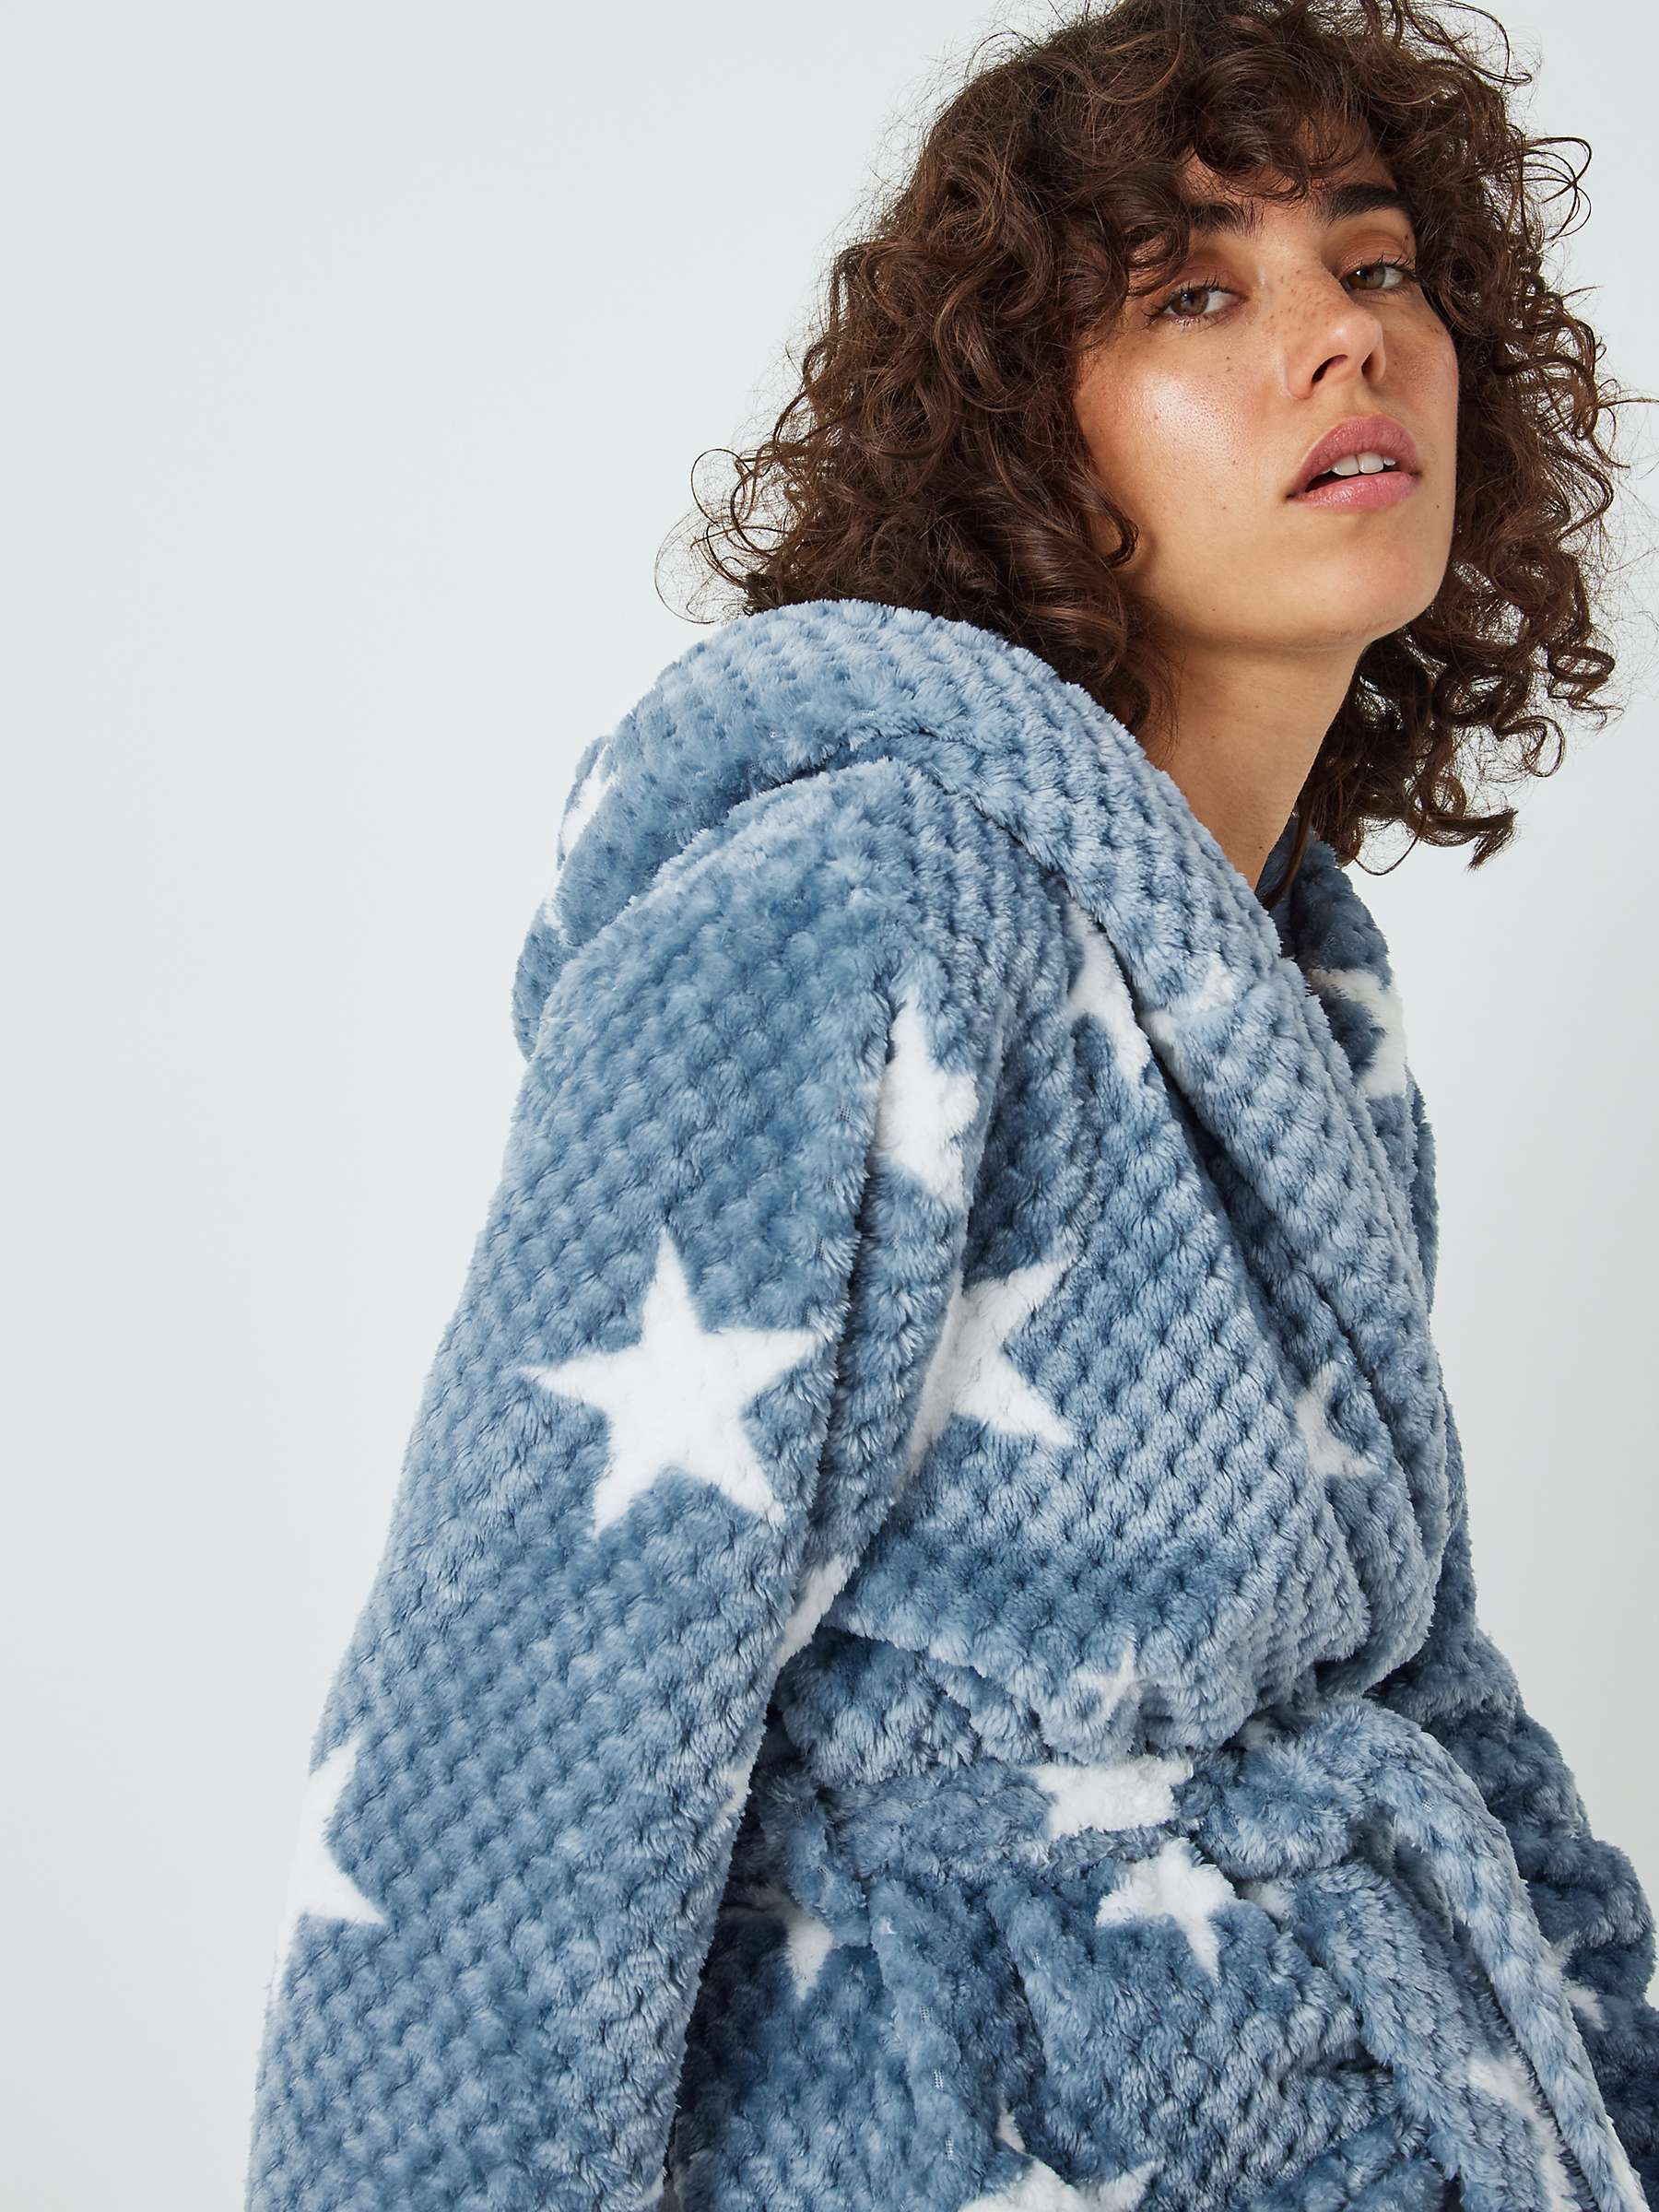 Buy John Lewis Waffle Star Dressing Gown Online at johnlewis.com